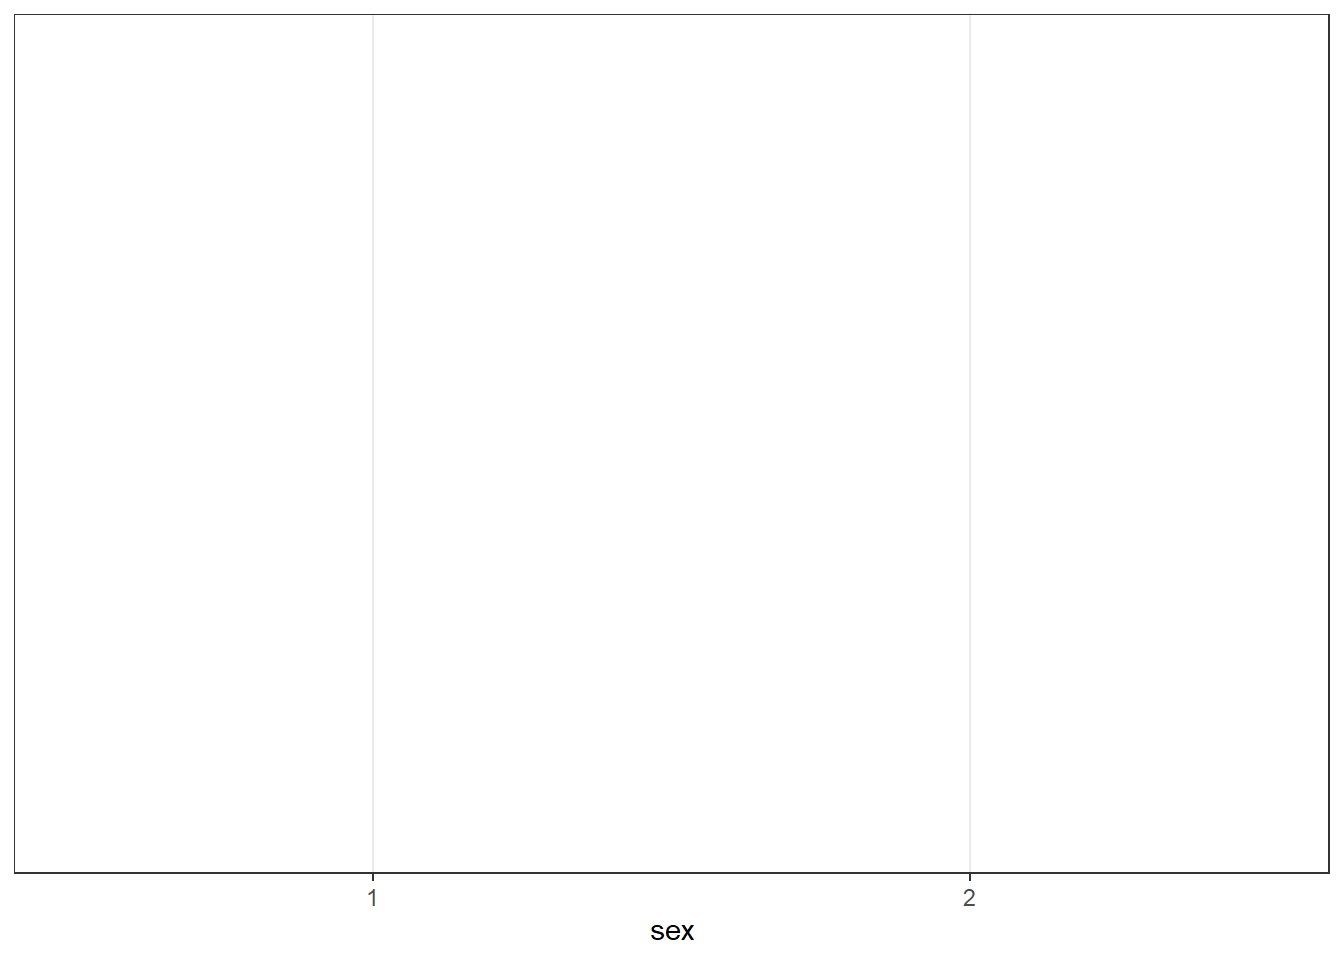 First ggplot() layer sets the axes